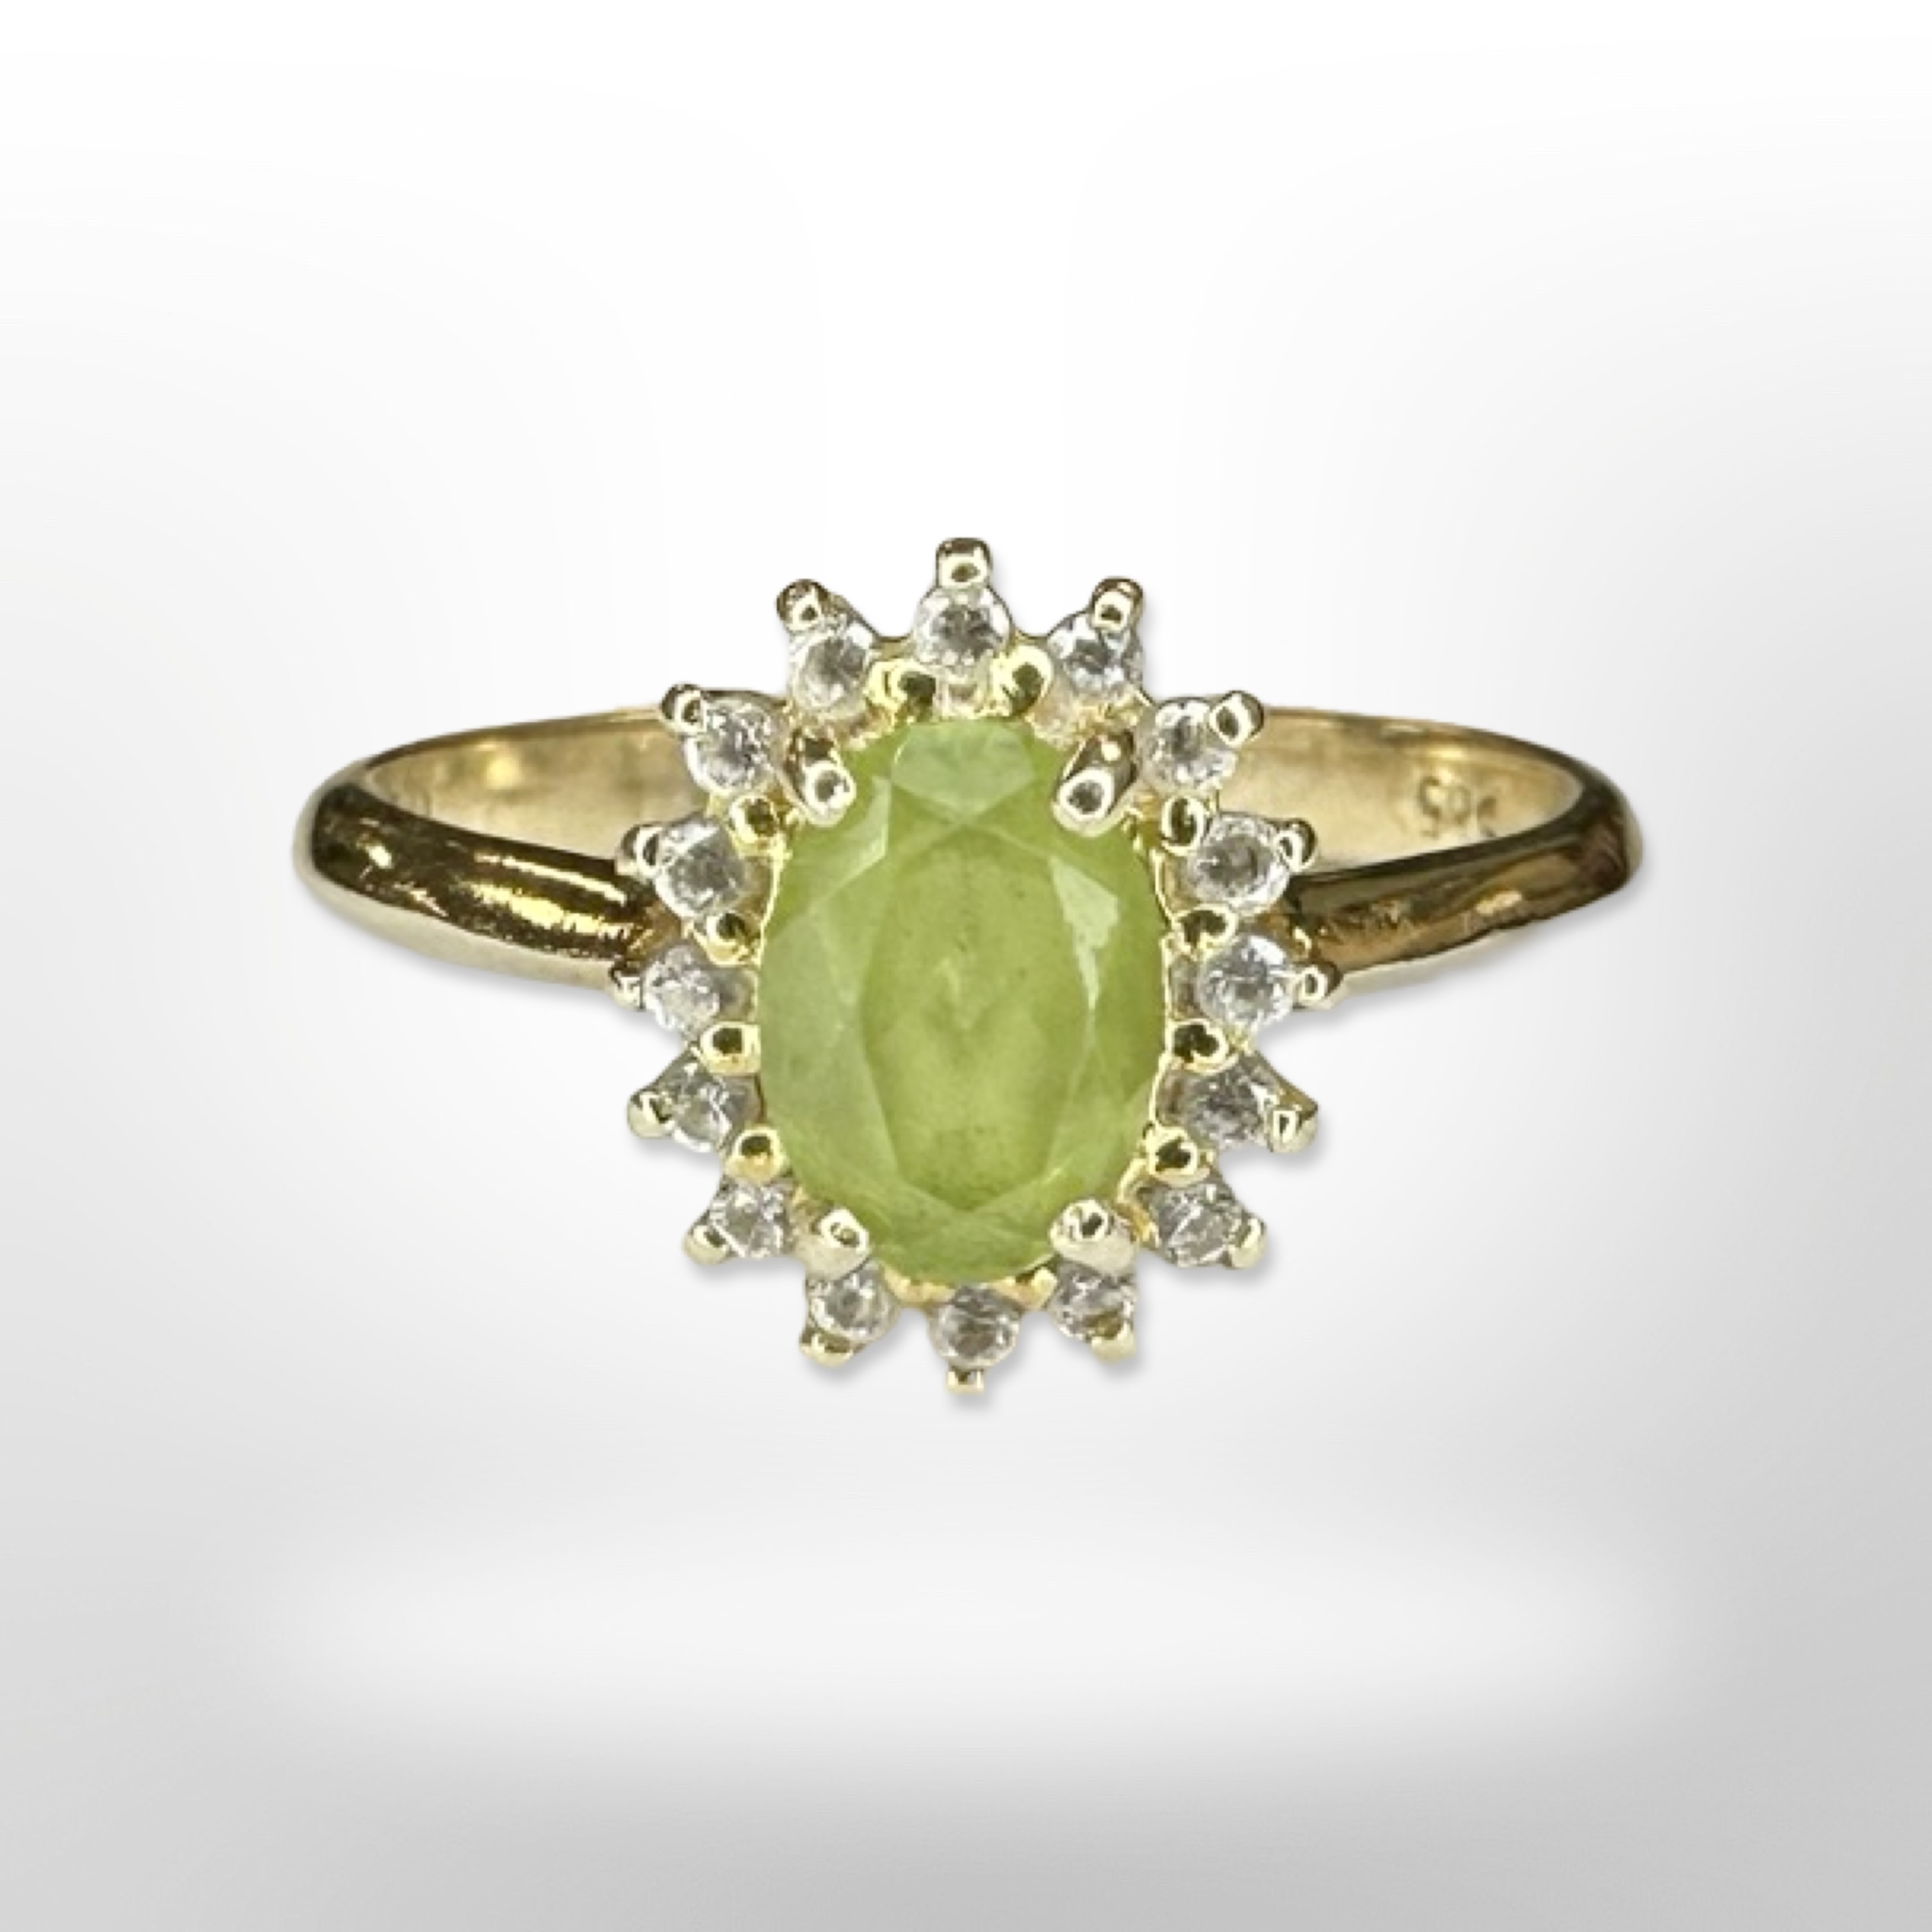 A 14ct yellow gold peridot diamond cluster ring, size N/O. CONDITION REPORT: 2.